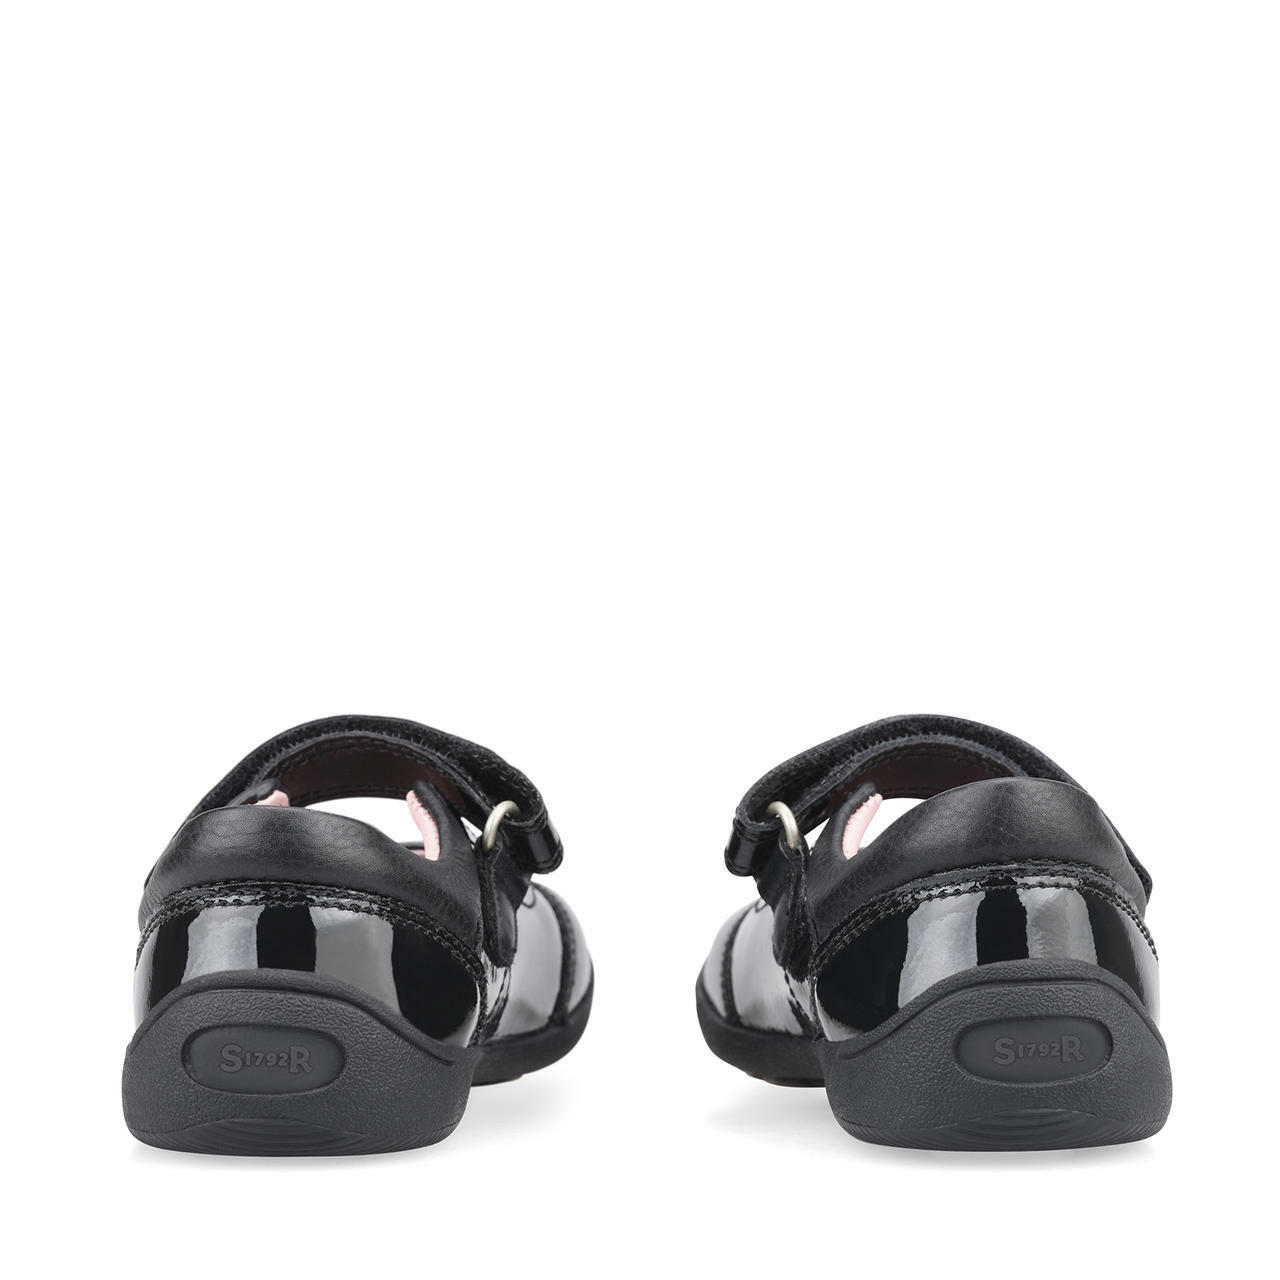 A pair of girls pre school shoes by Start Rite, style Twizzle, in black patent with velcro fastening. Back view.